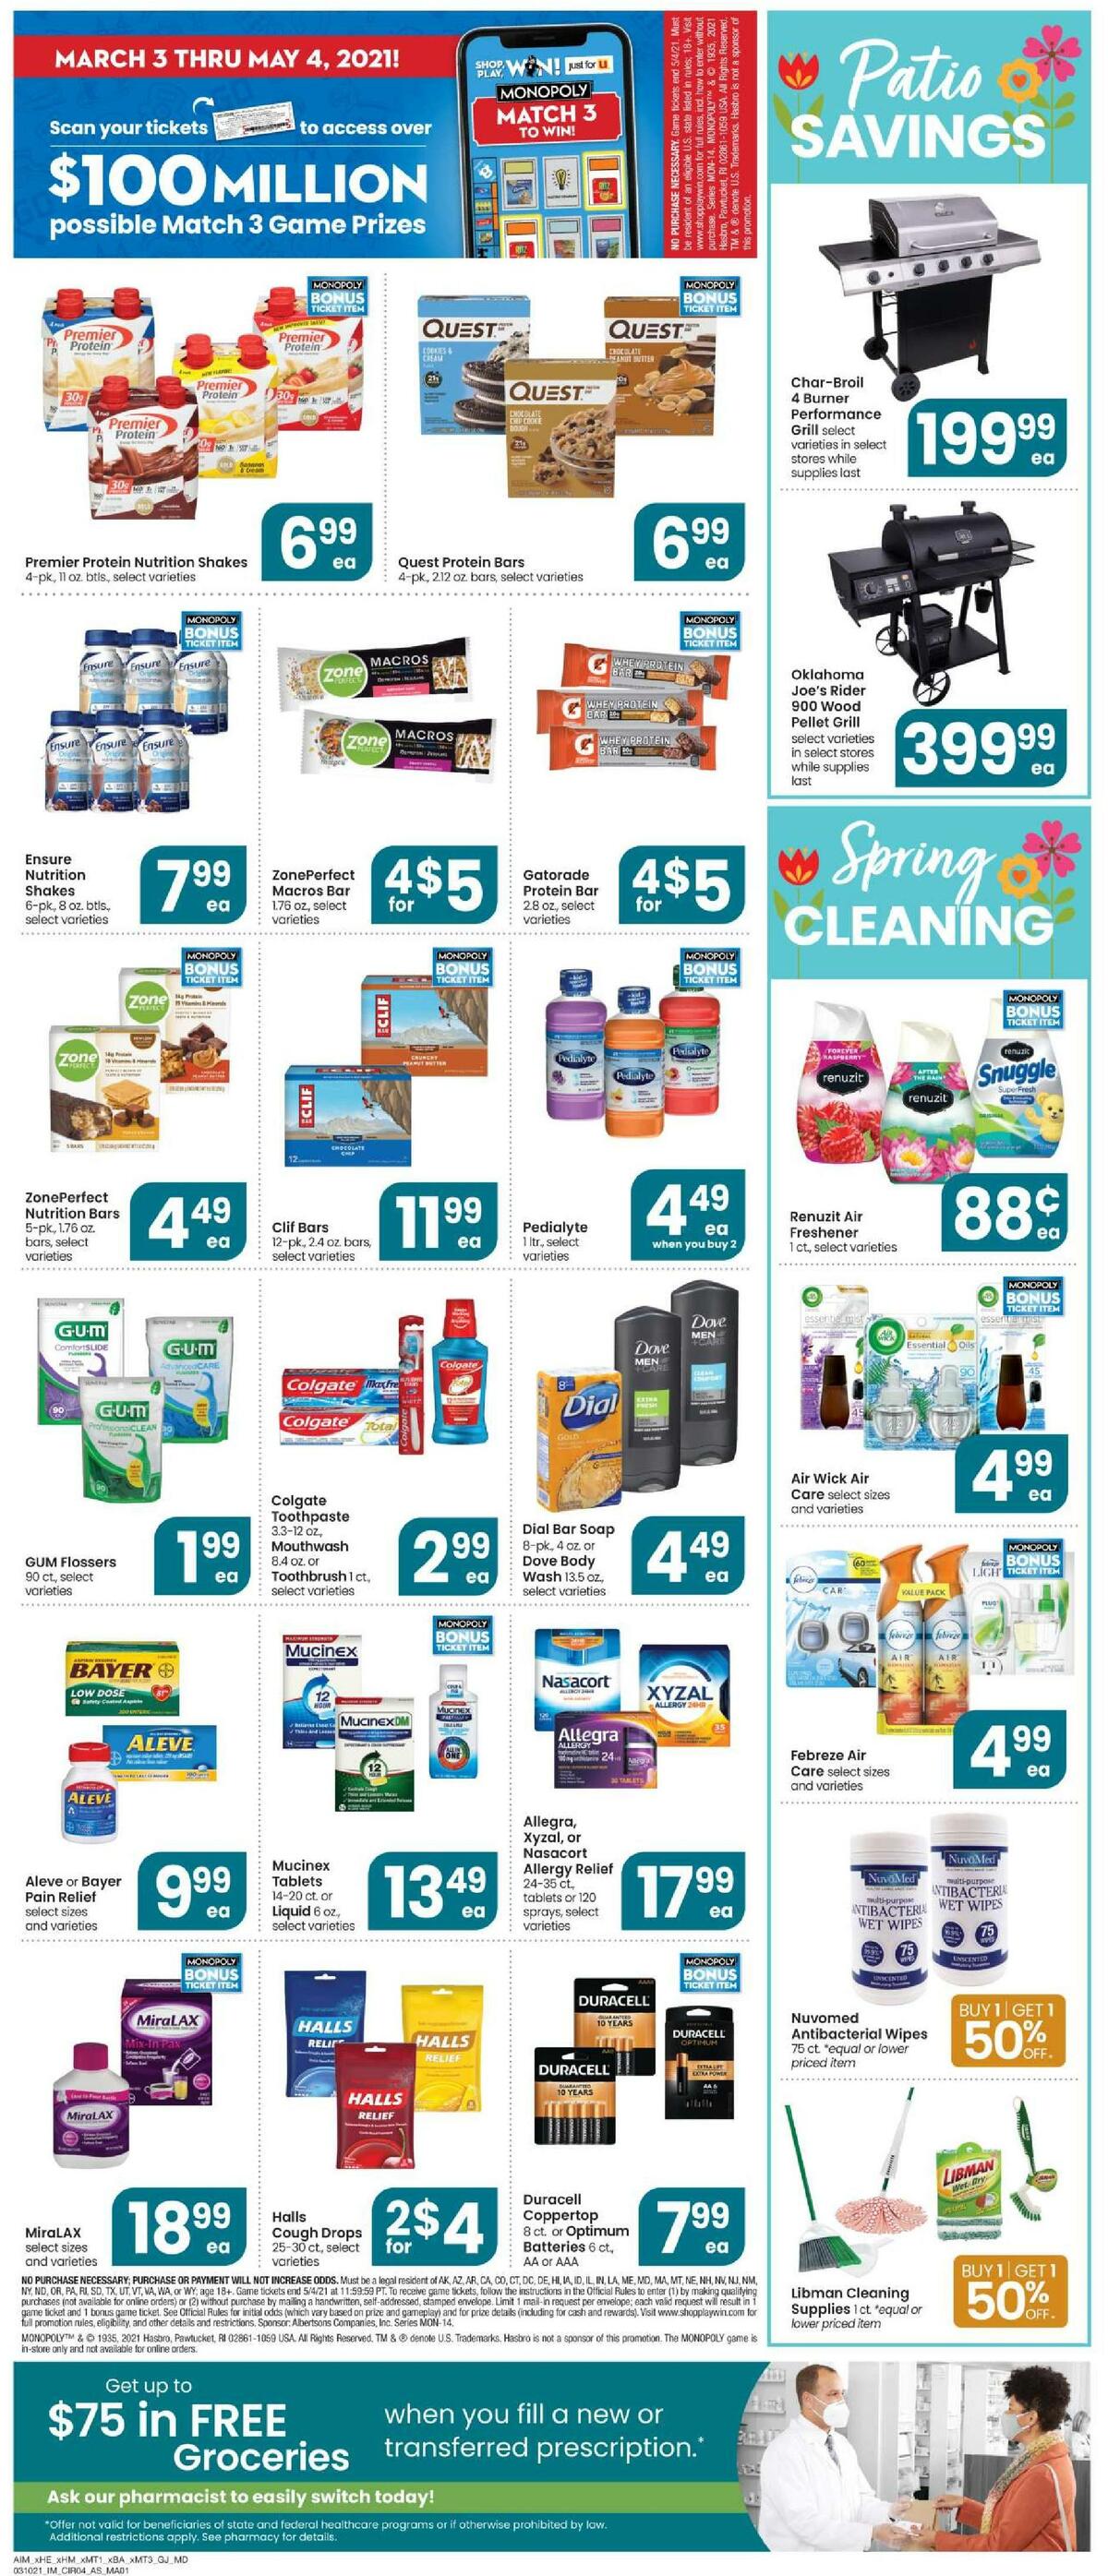 Albertsons Weekly Ad from March 10